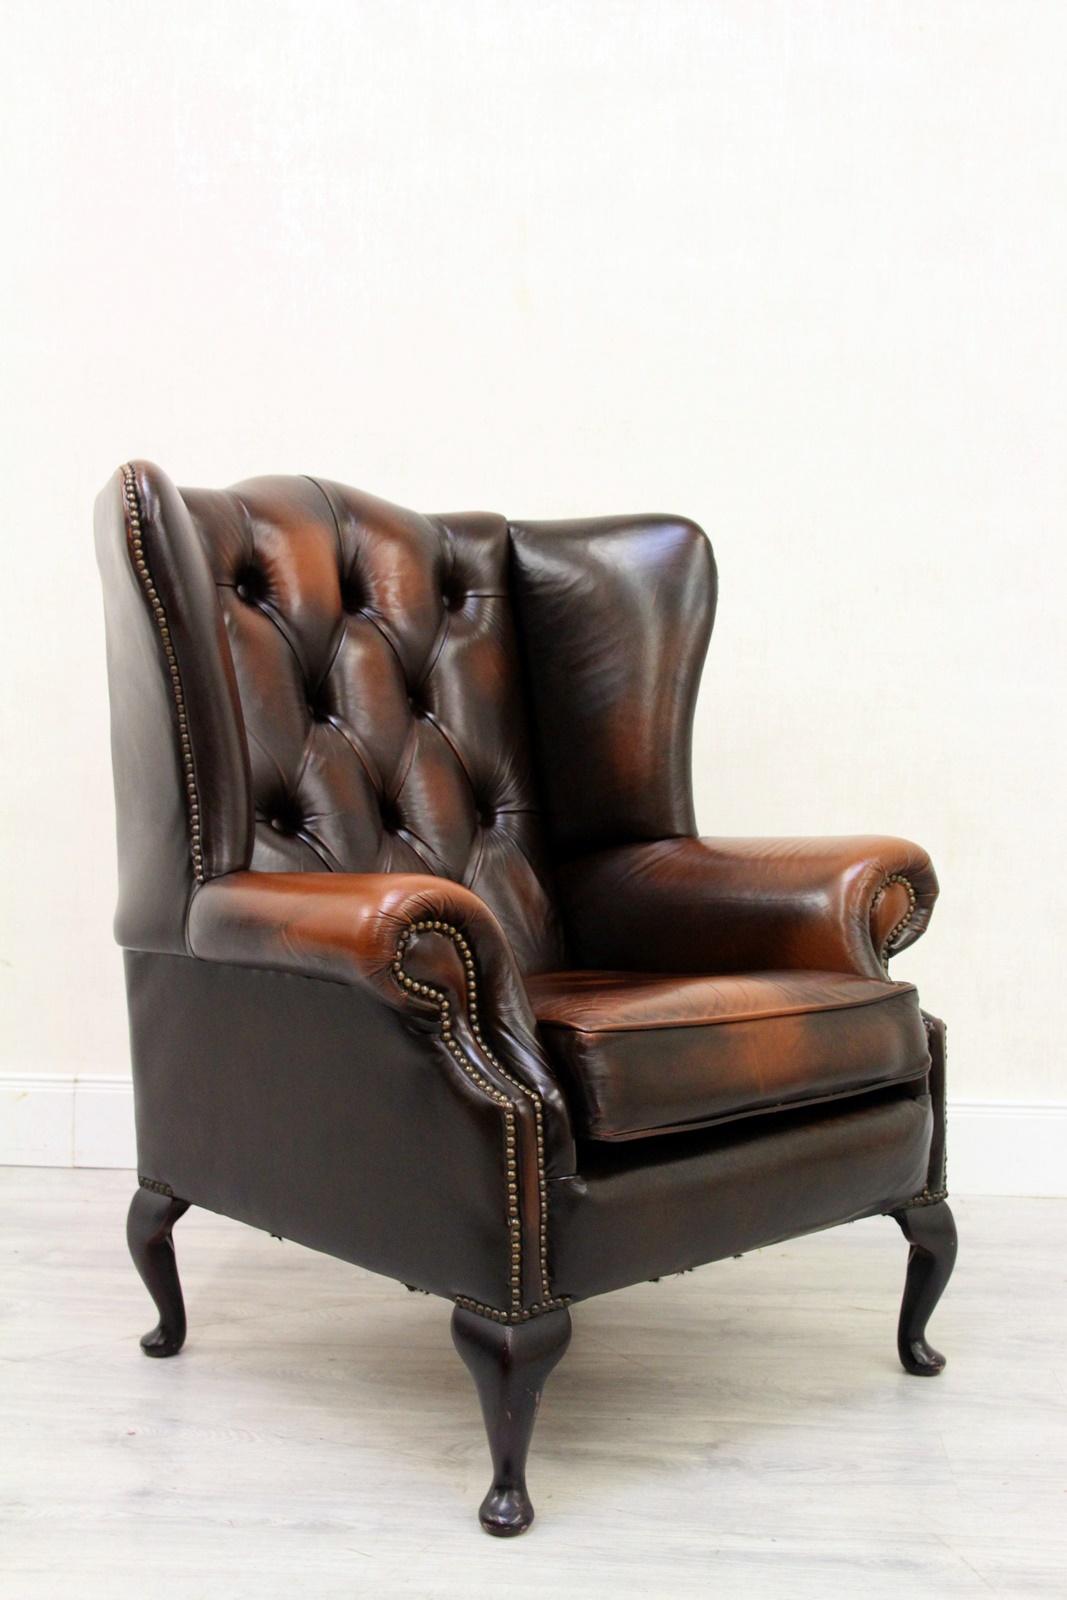 Chesterfield Wing Chair Armchair Recliner Antique 10